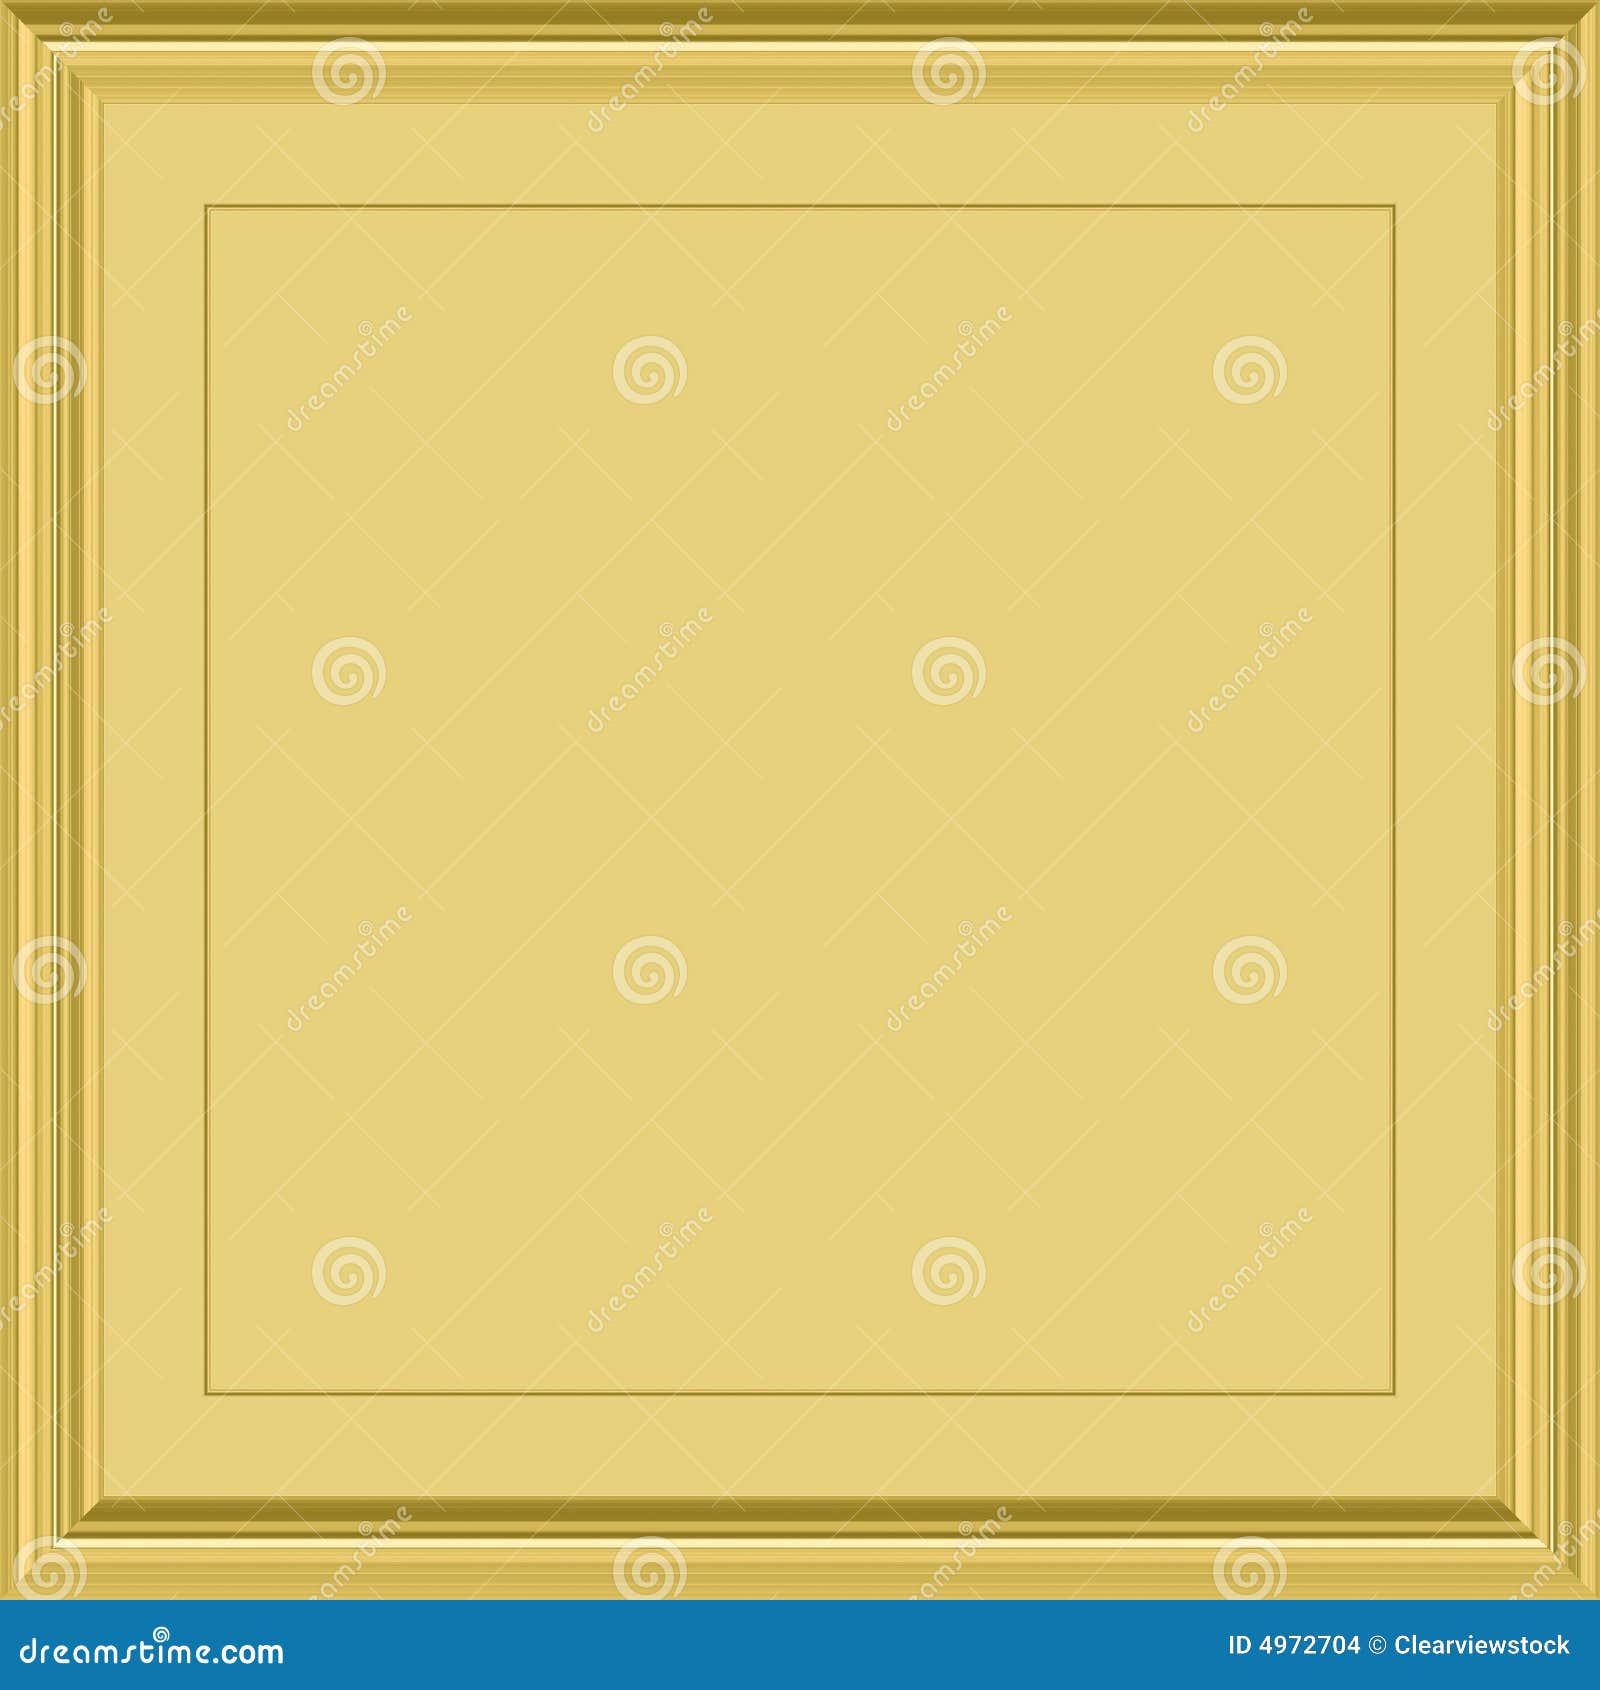 Gold plaque stock vector. Illustration of plaque, frame - 4972704